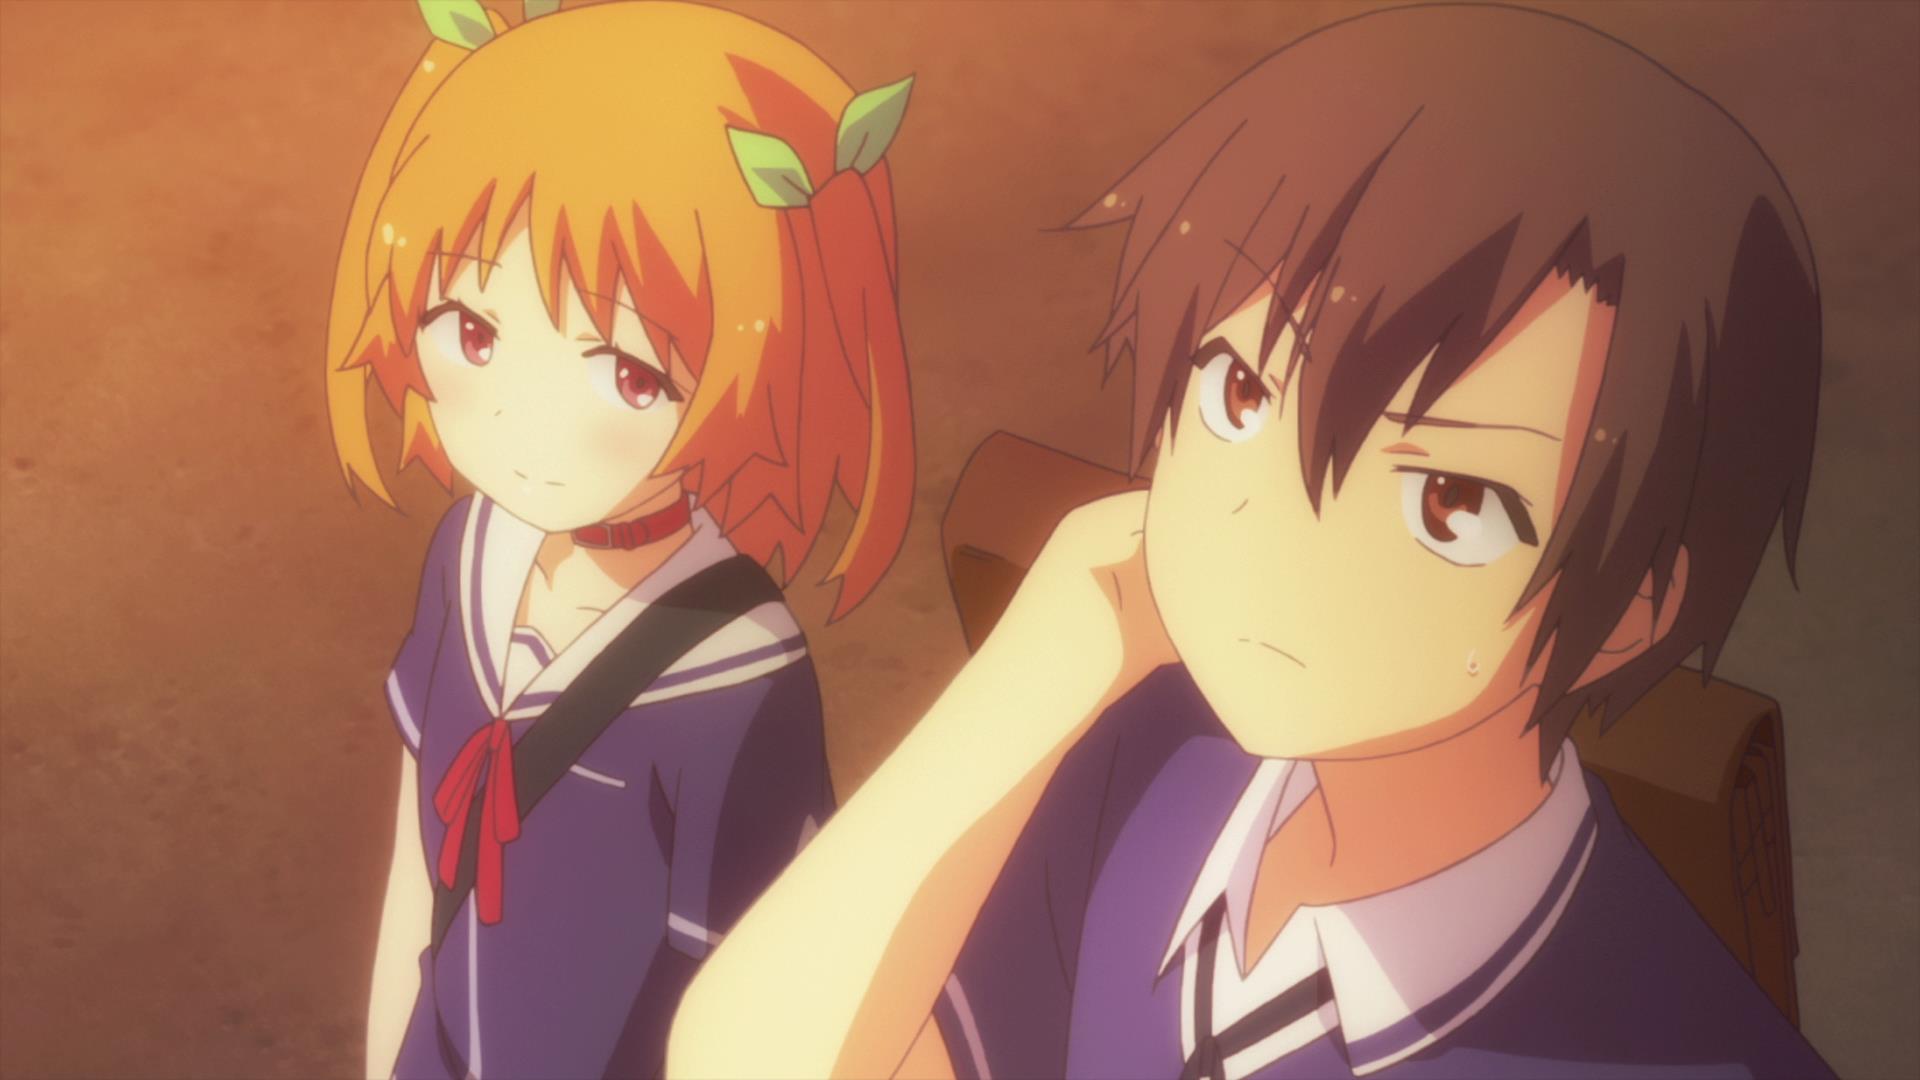 Pin by cont_master on Oreshura | Anime, All anime, Art